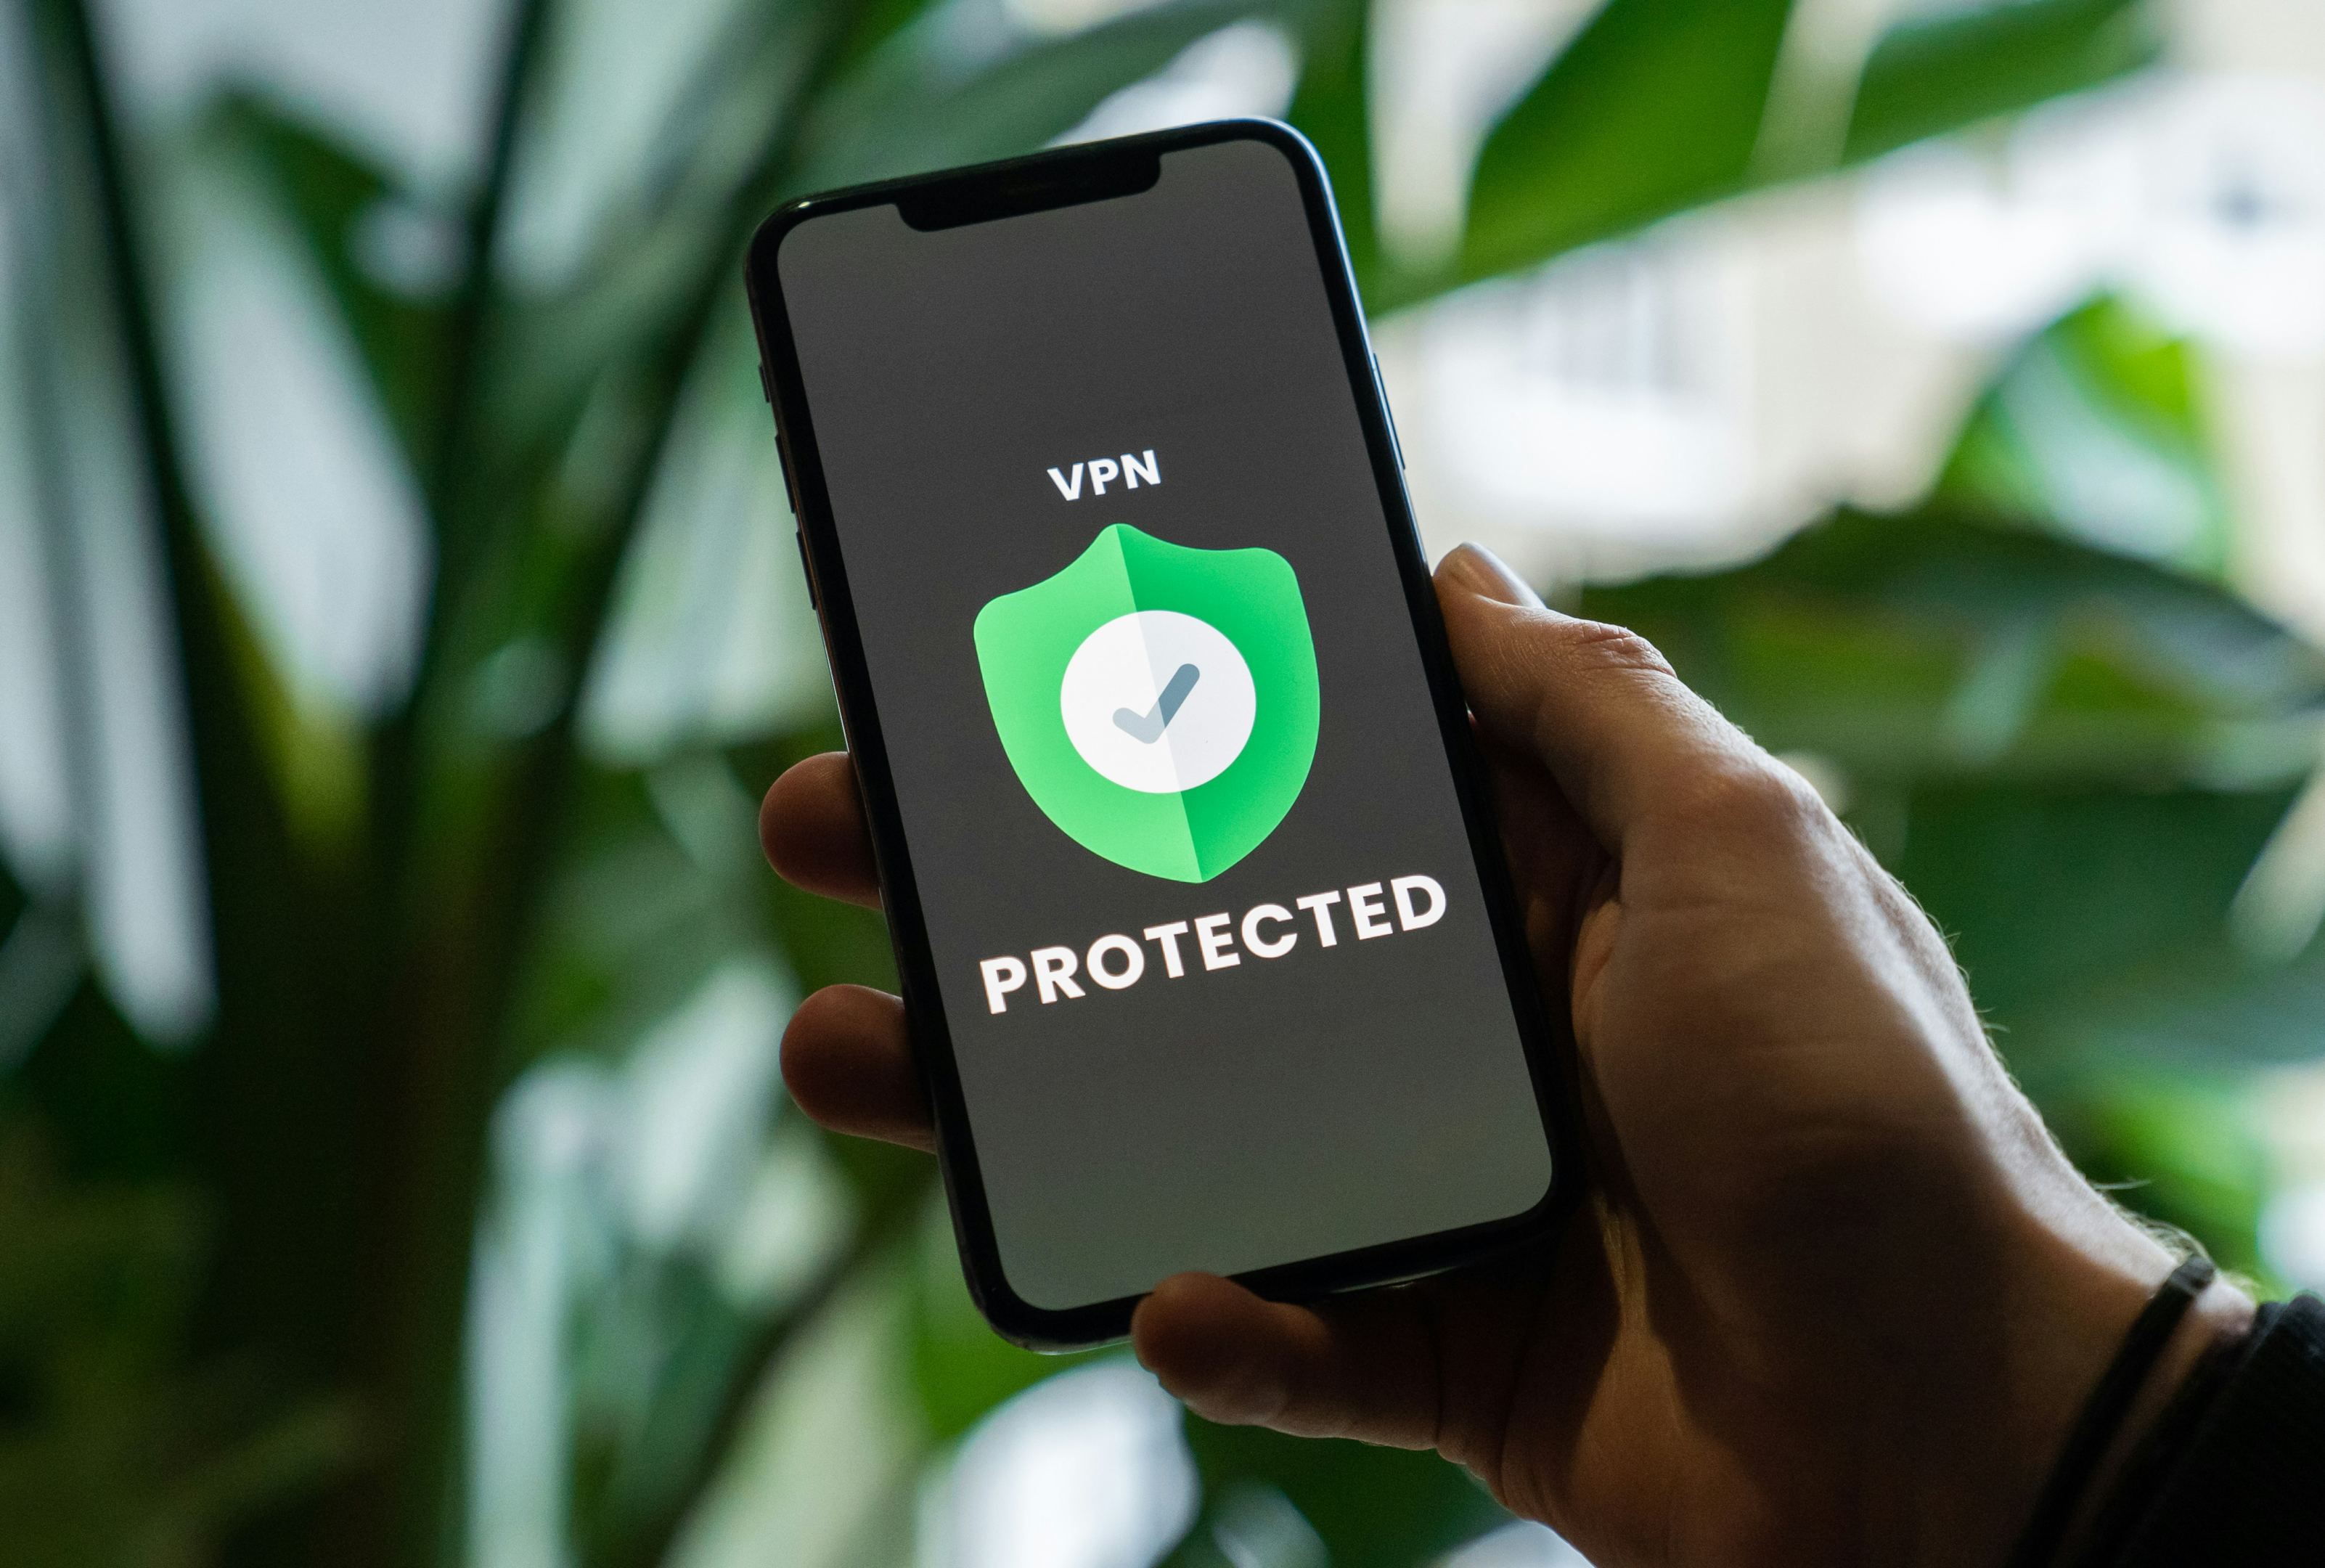 Phone that shows VPN and protected messages with a green shield